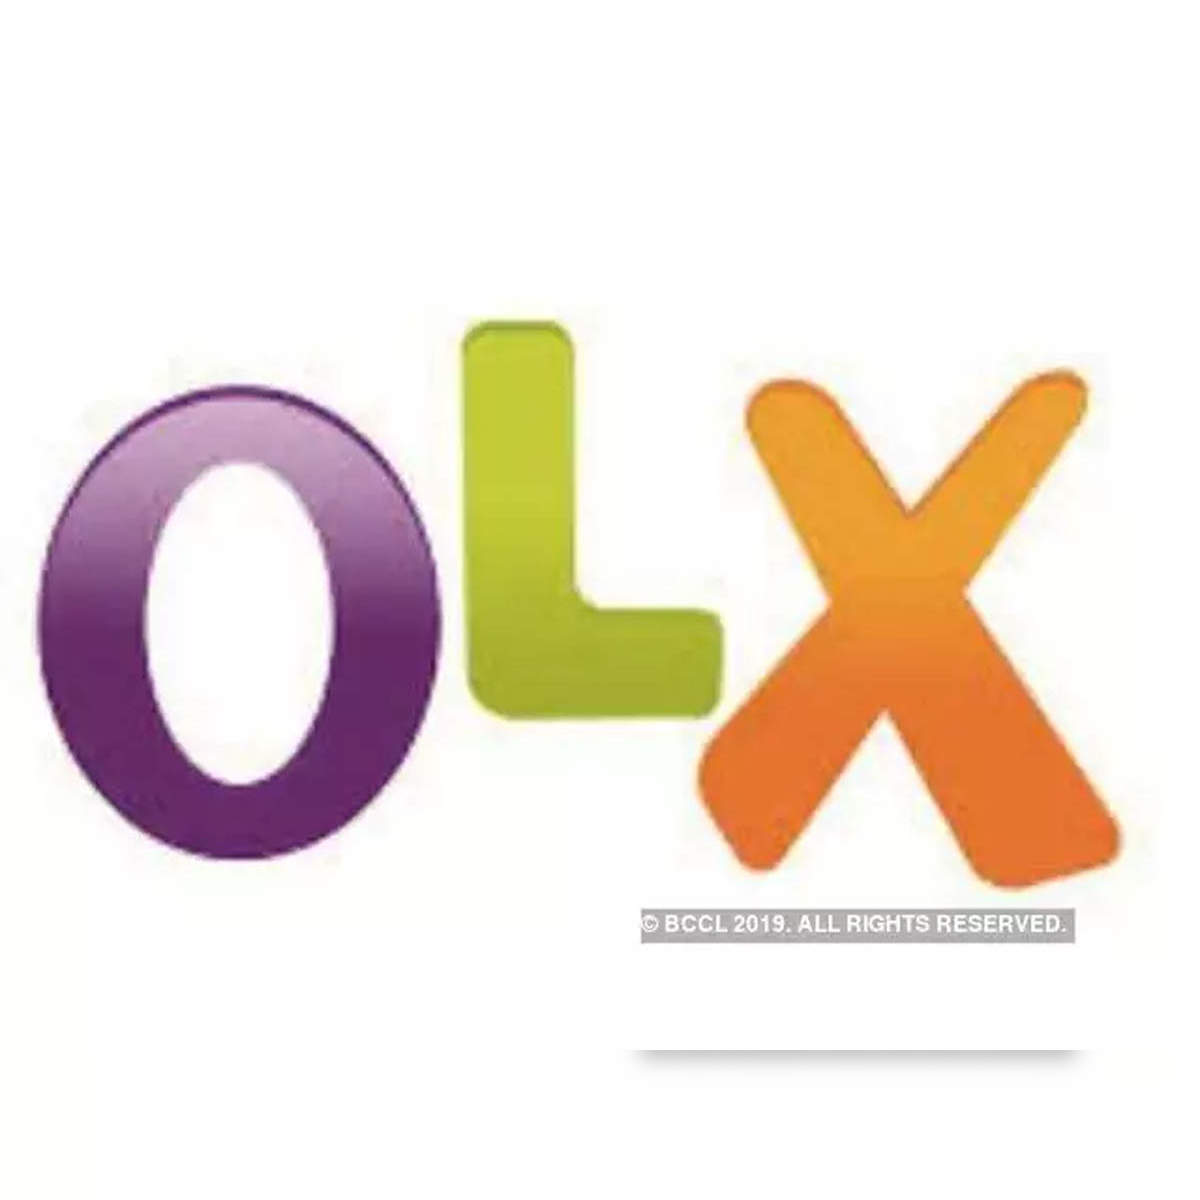 OLX: Buy & Sell Used Electroni – Apps on Google Play